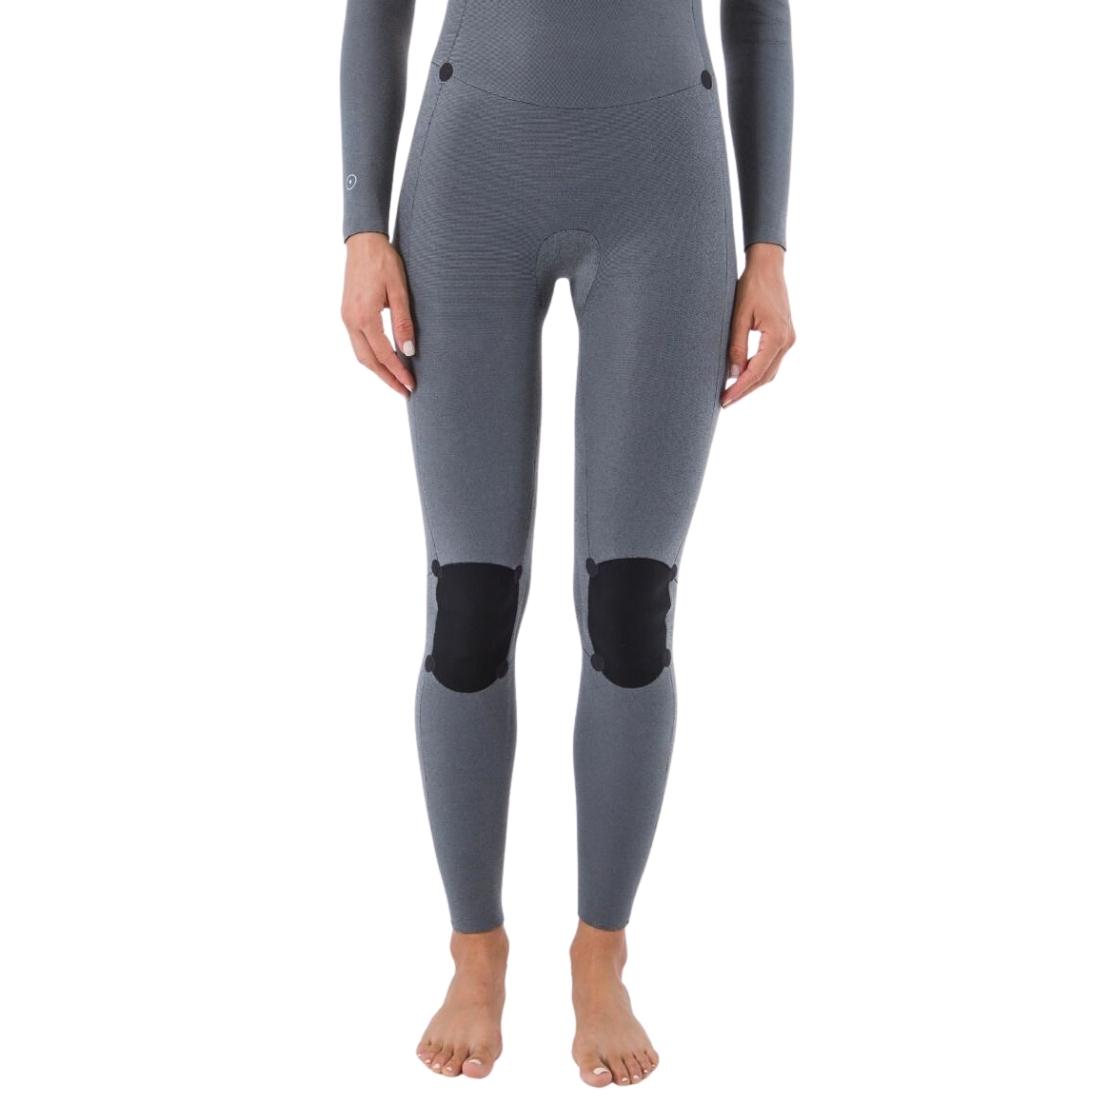 Hurley Womens Advantage 3/2mm Chest Zip Full Wetsuit - Charcoal Gray